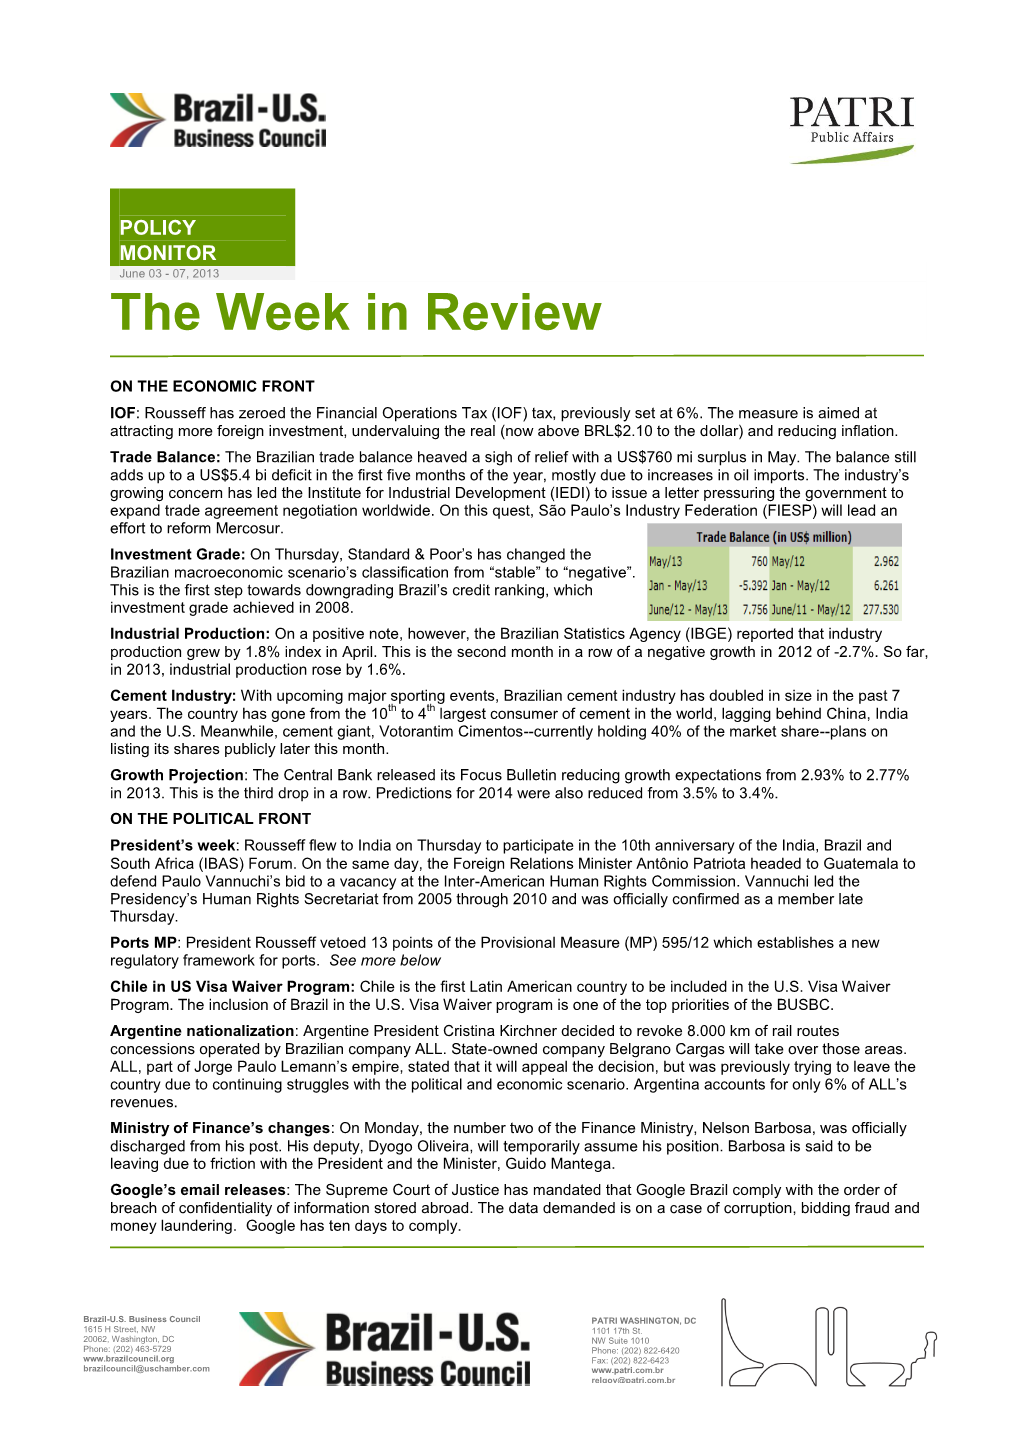 POLICY MONITOR June 03 - 07, 2013